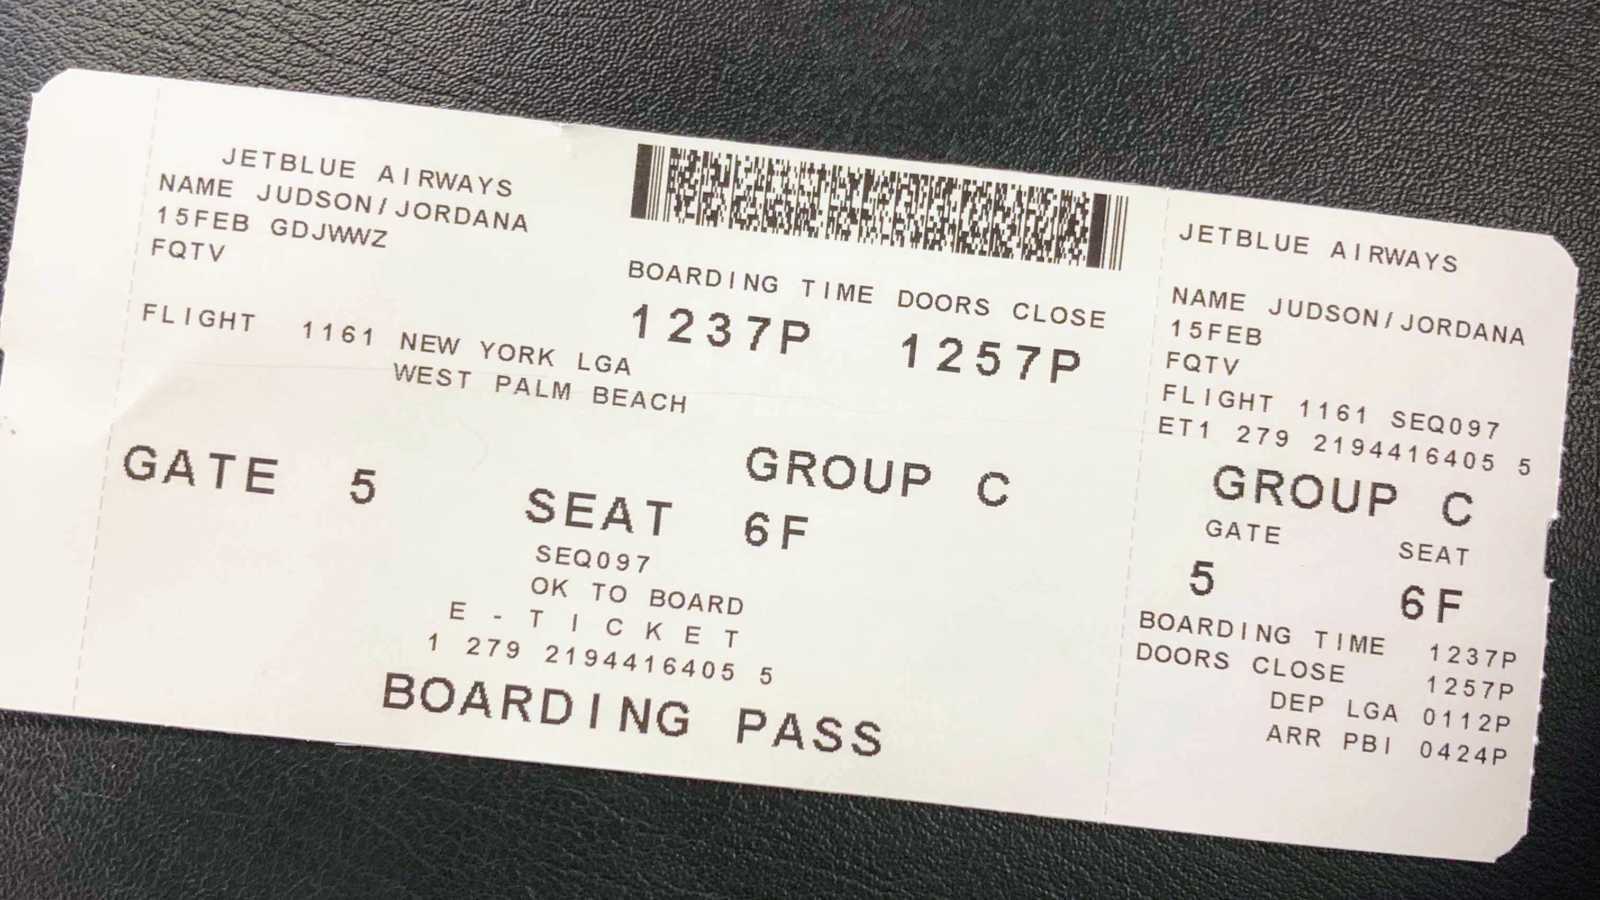 Teens plane ticket to return home to West Palm Beach after Parkland school shooting in Florida